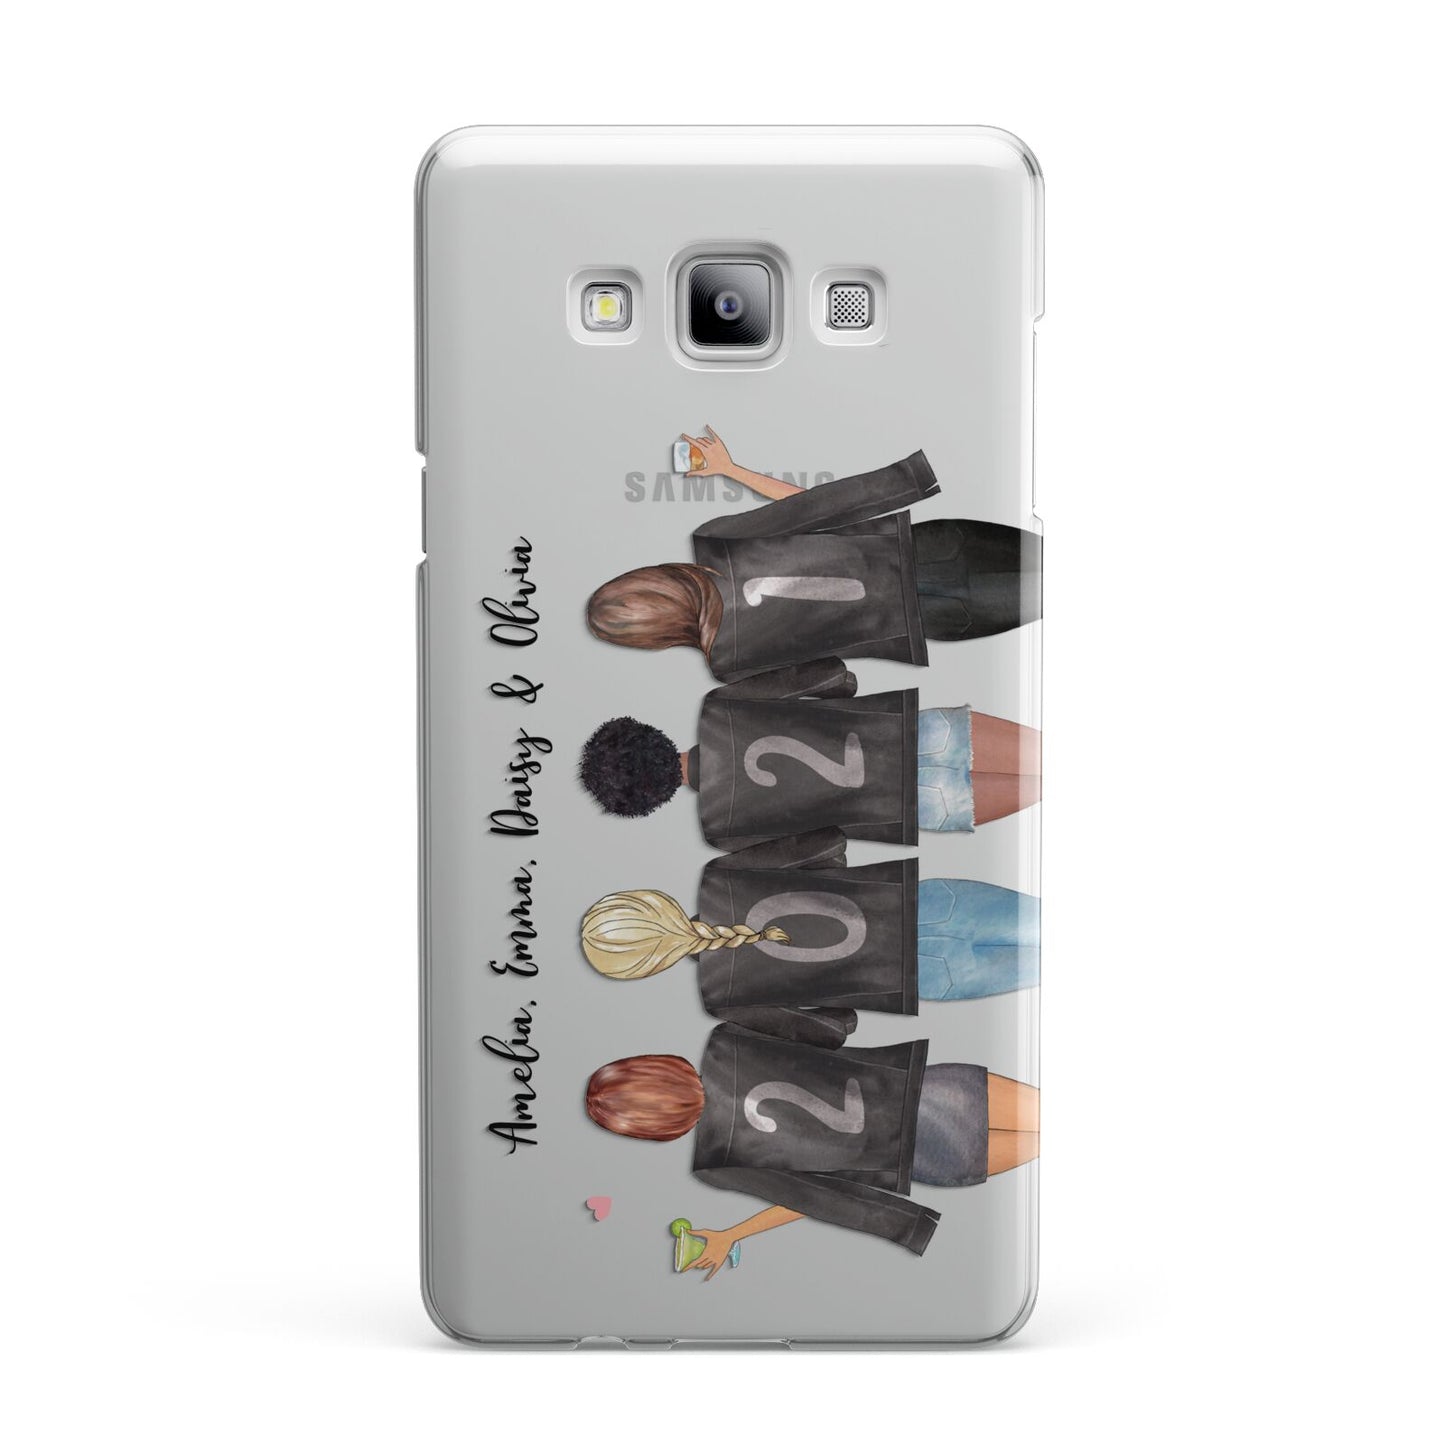 4 Best Friends with Names Samsung Galaxy A7 2015 Case